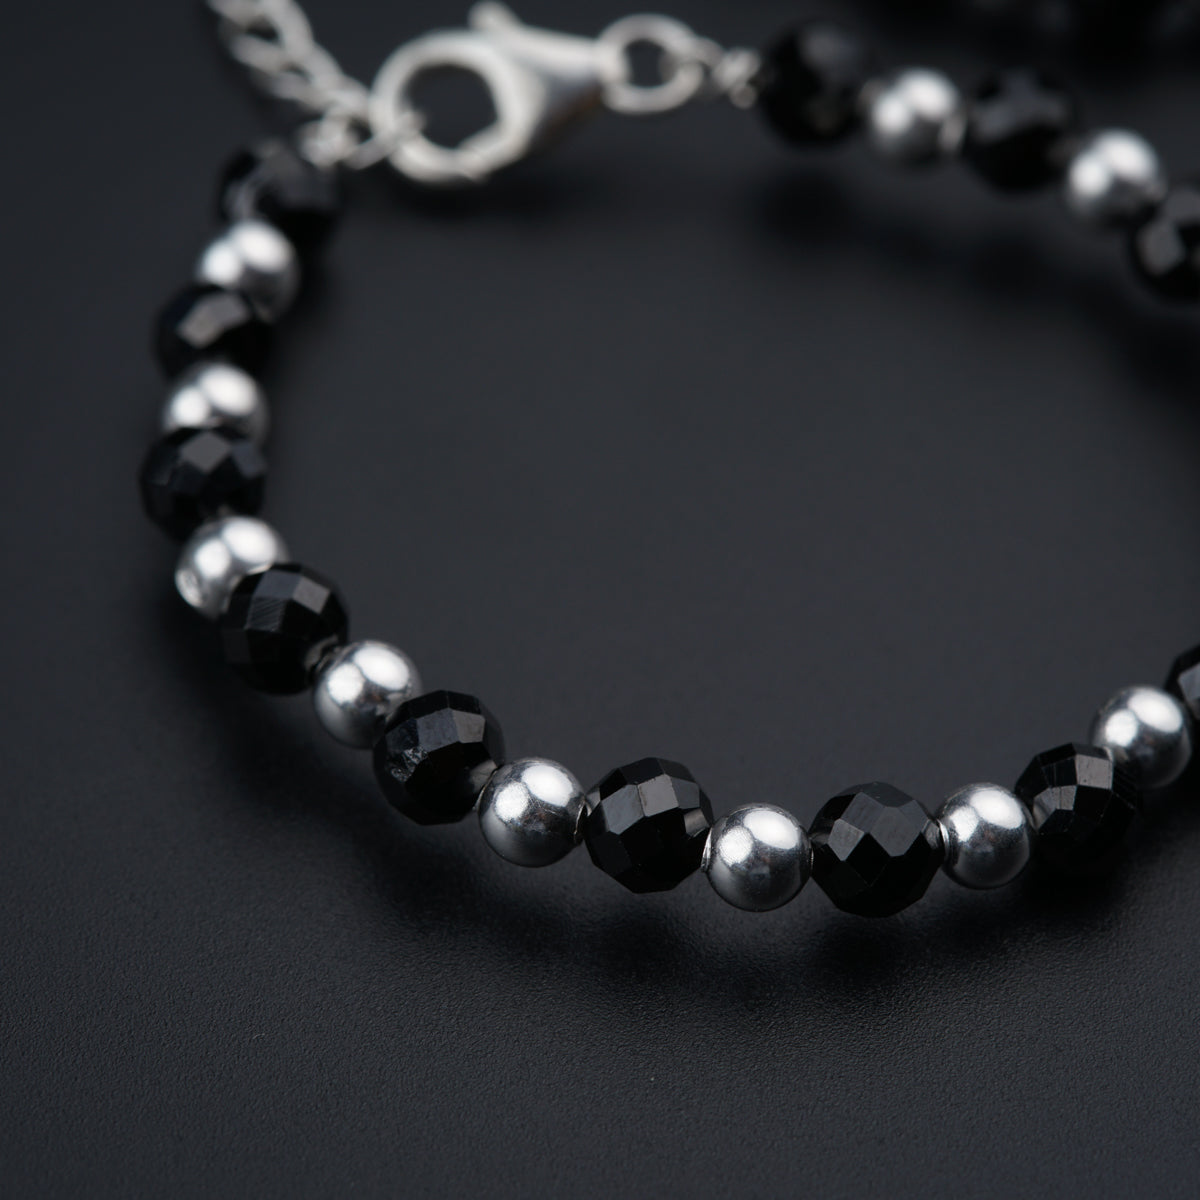 Baby Bracelet with Silver Beads and Black Spinal